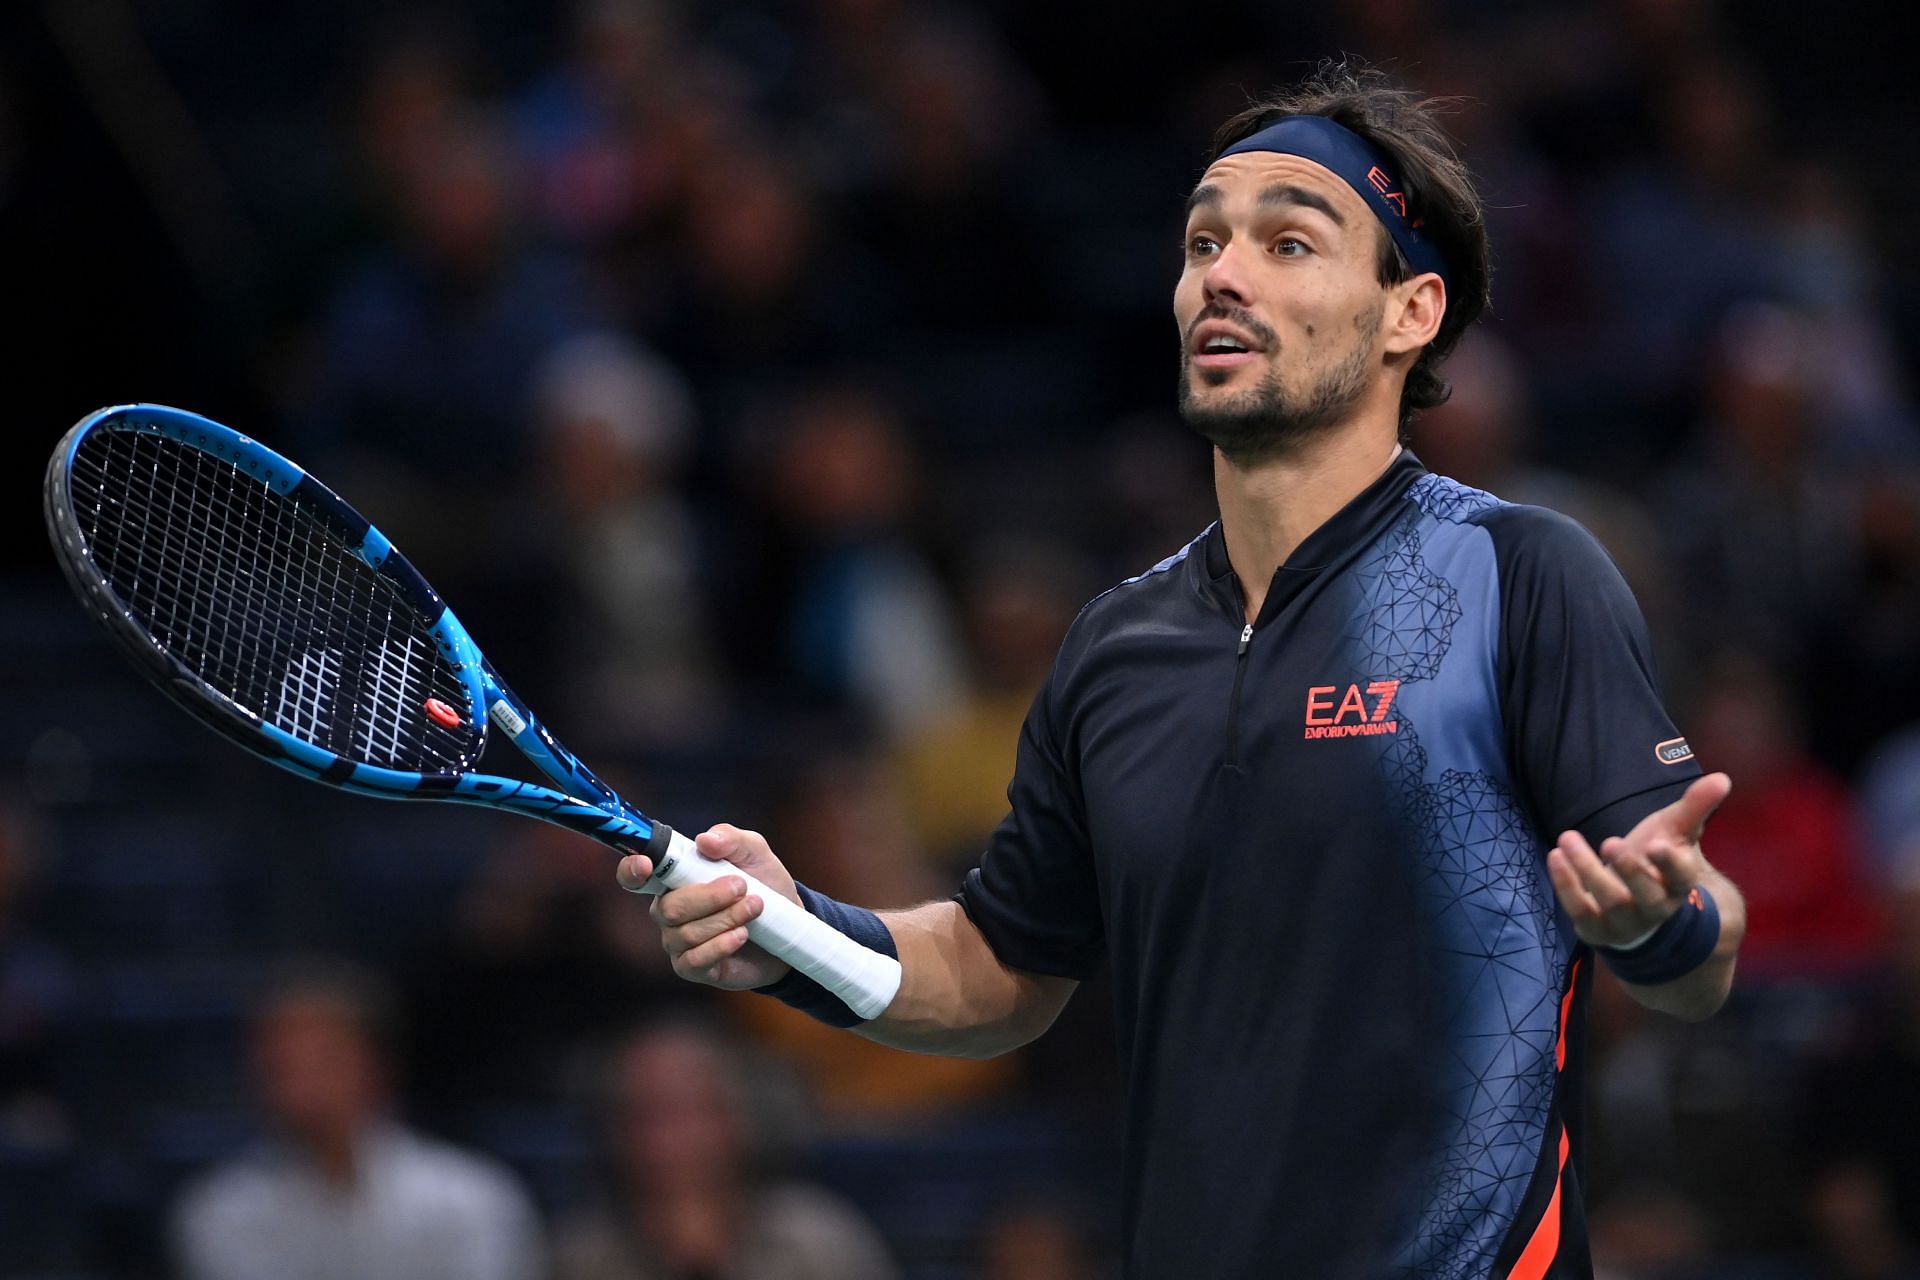 Fognini scored a 7-5, 7-5 win over Dusan Lajovic in the opening round